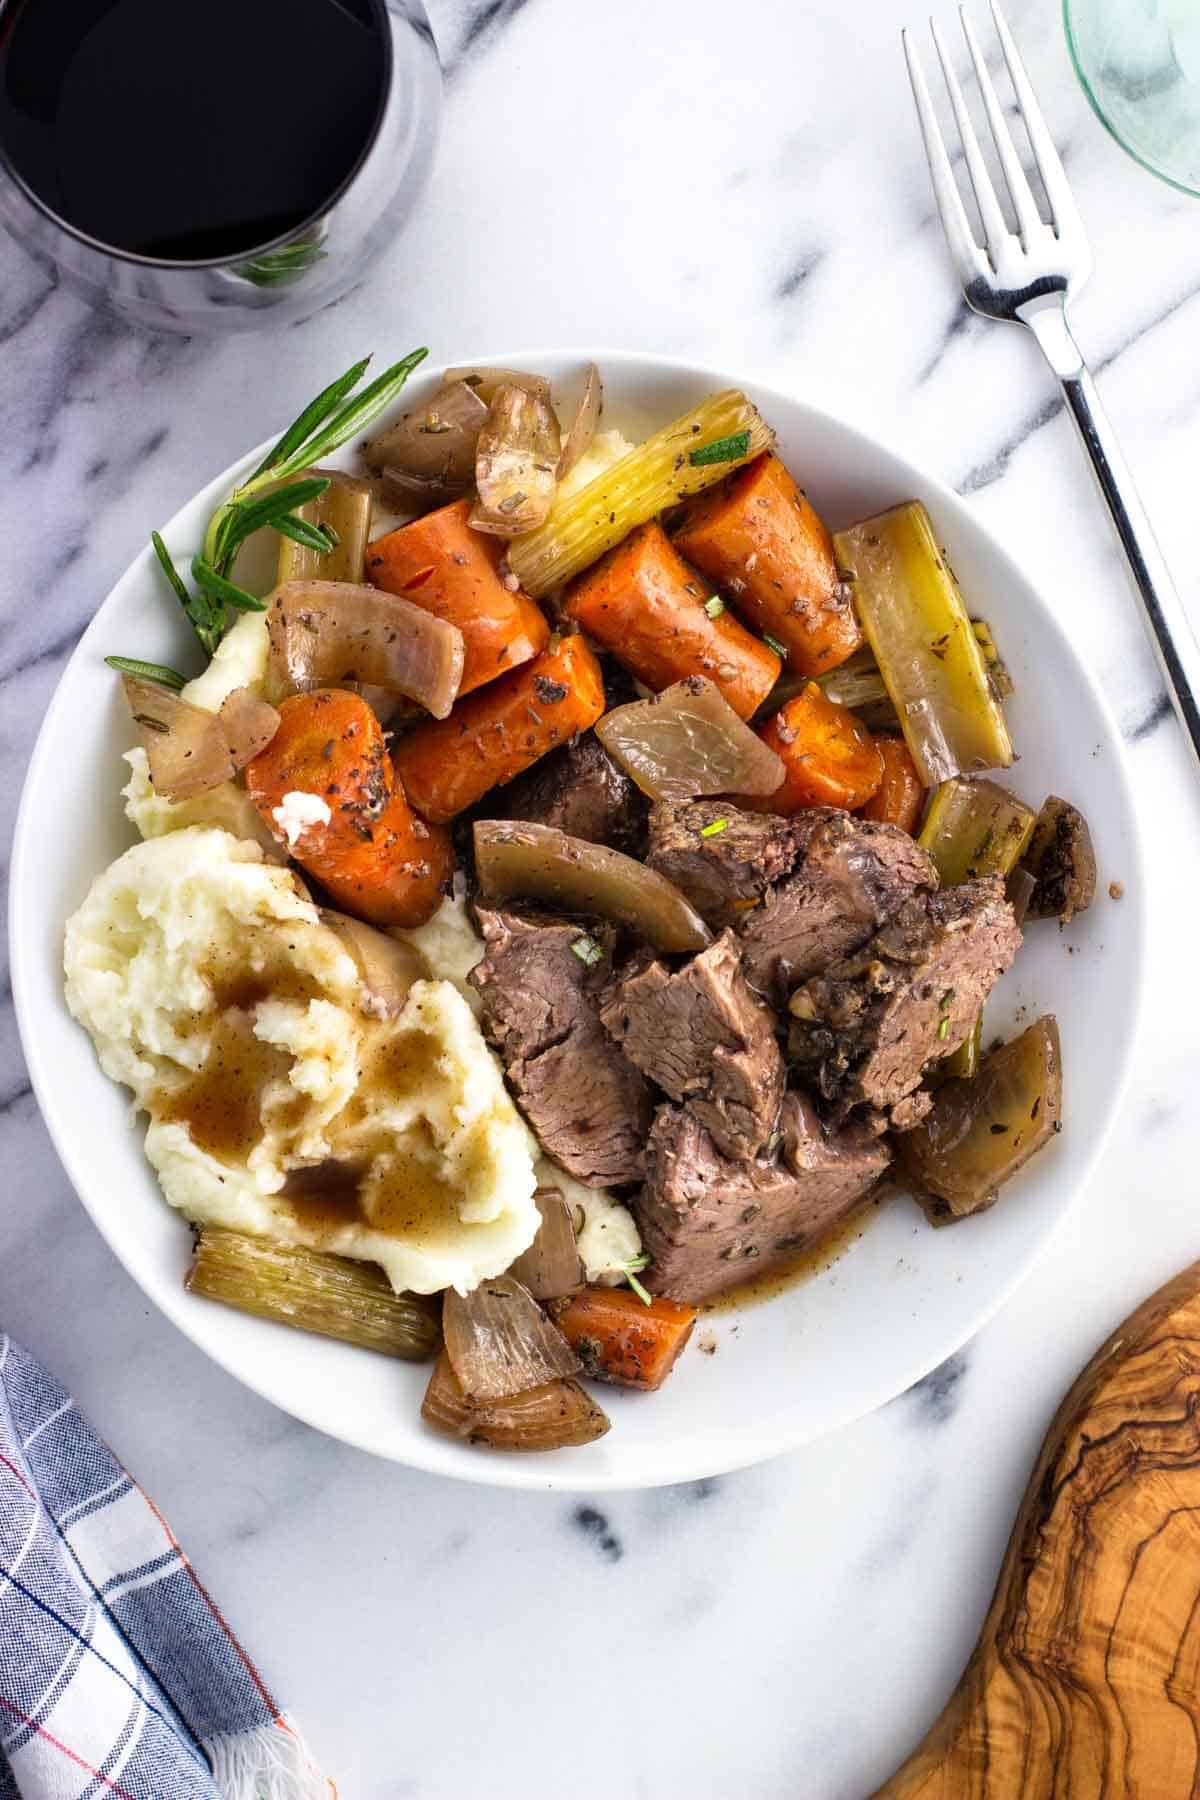 A shallow dish of sliced beef shoulder roast, vegetables, and mashed potatoes.